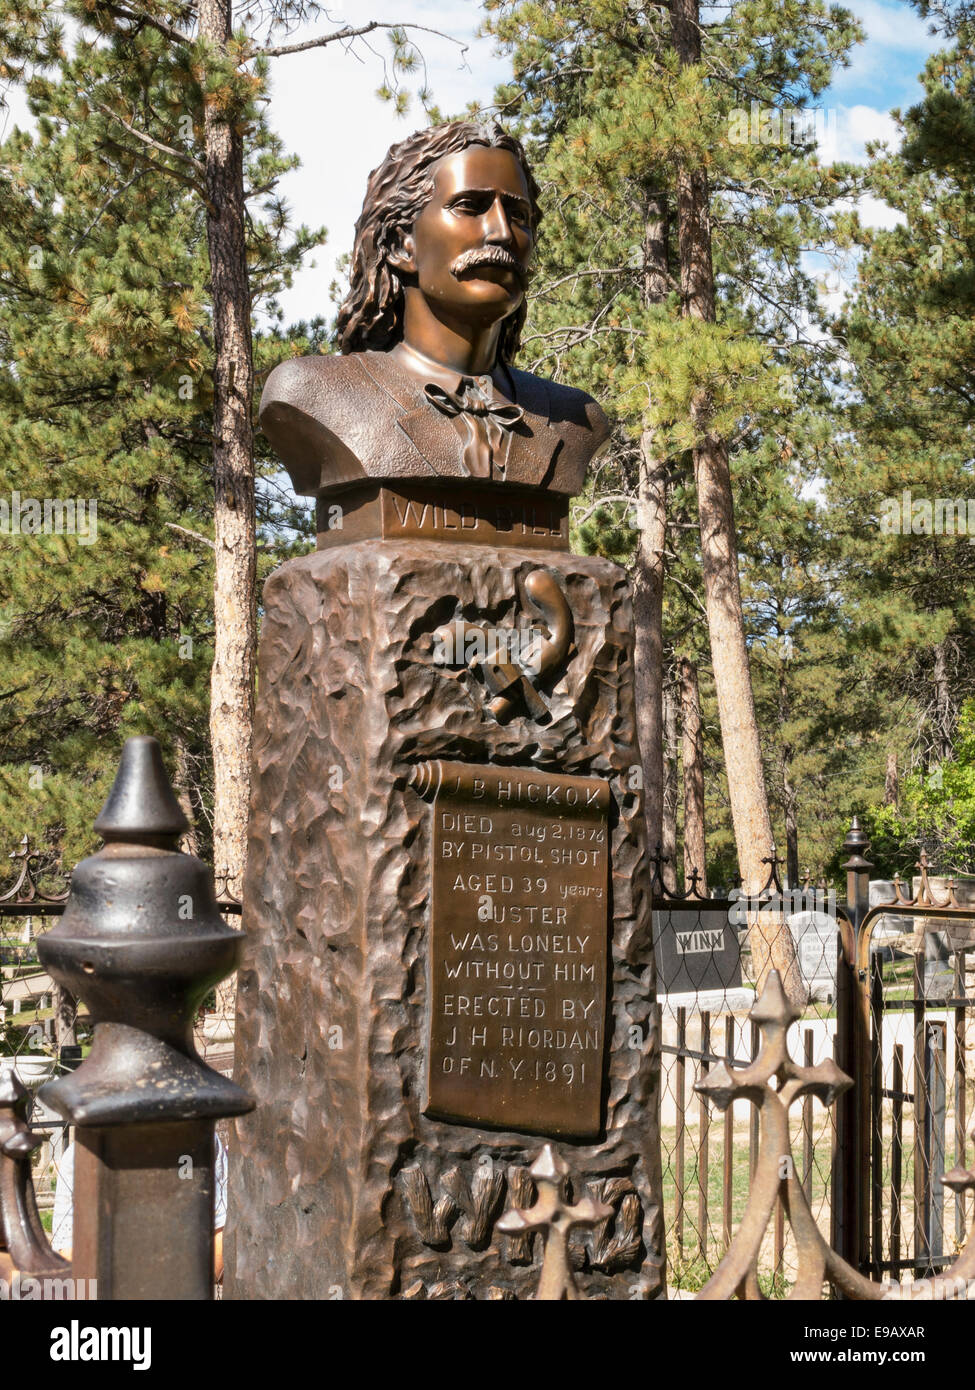 Grave of wild bill hickok hi-res stock photography and images - Alamy